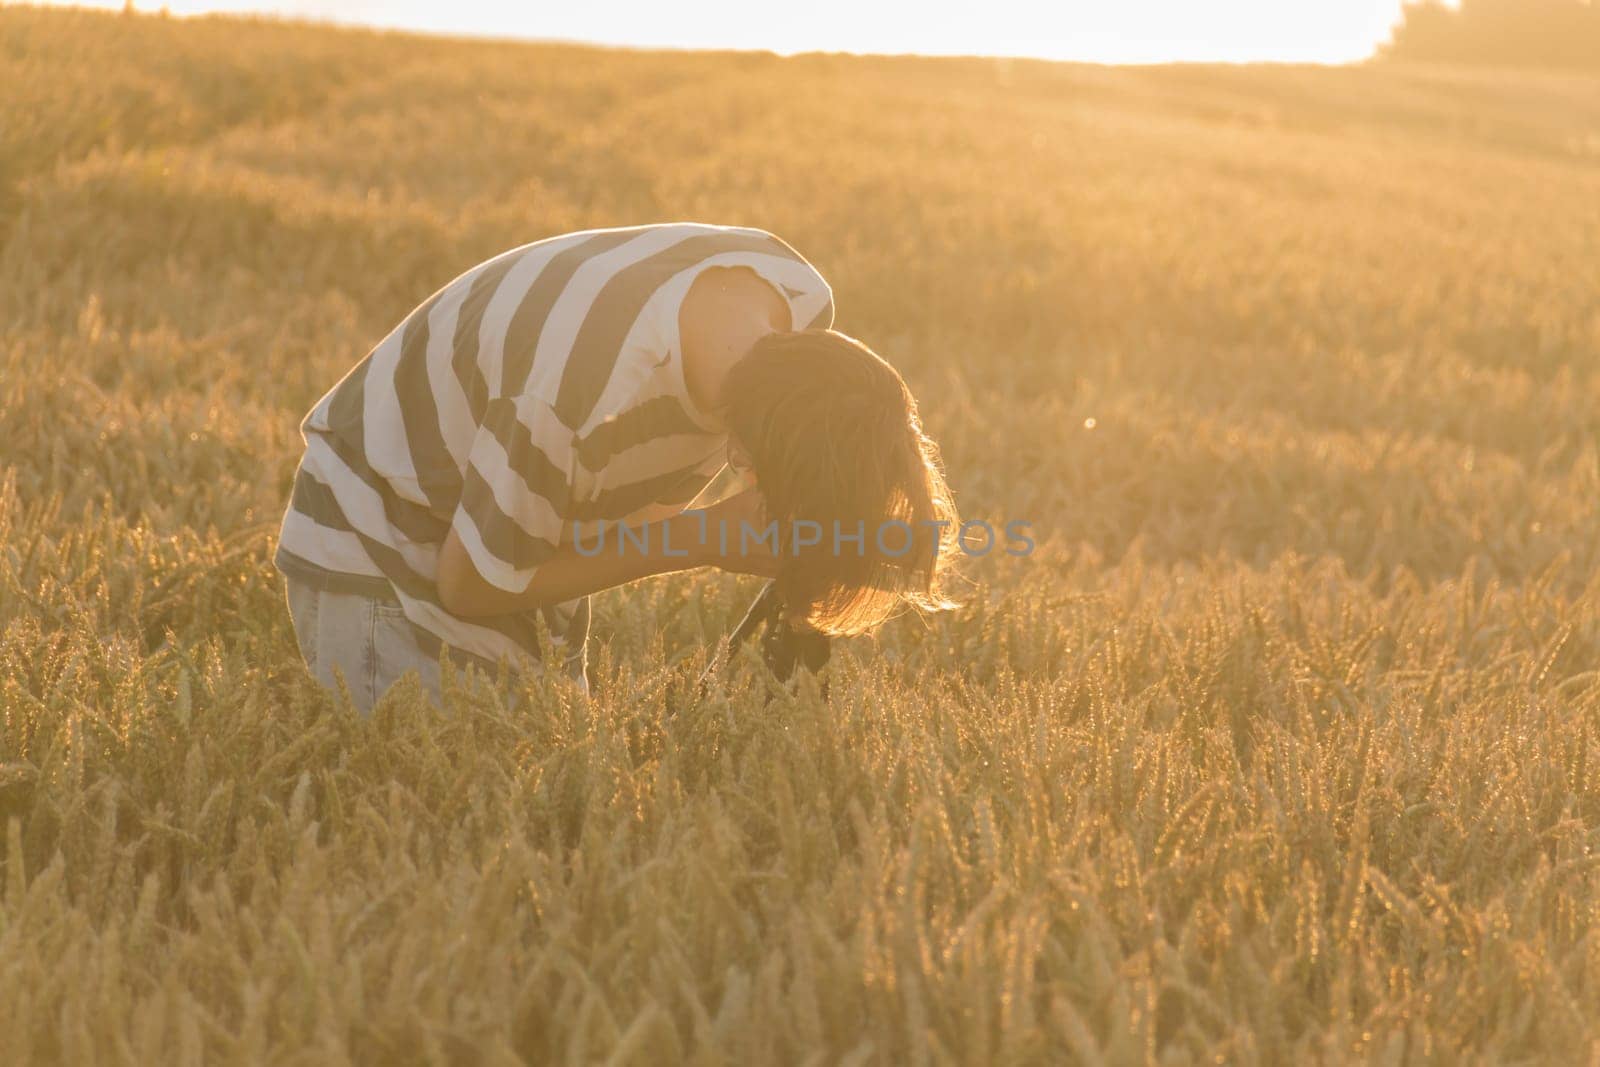 A young man in a striped T-shirt shoots a sunset in a wheat field on a phone that is mounted on a tripod. by Alla_Yurtayeva